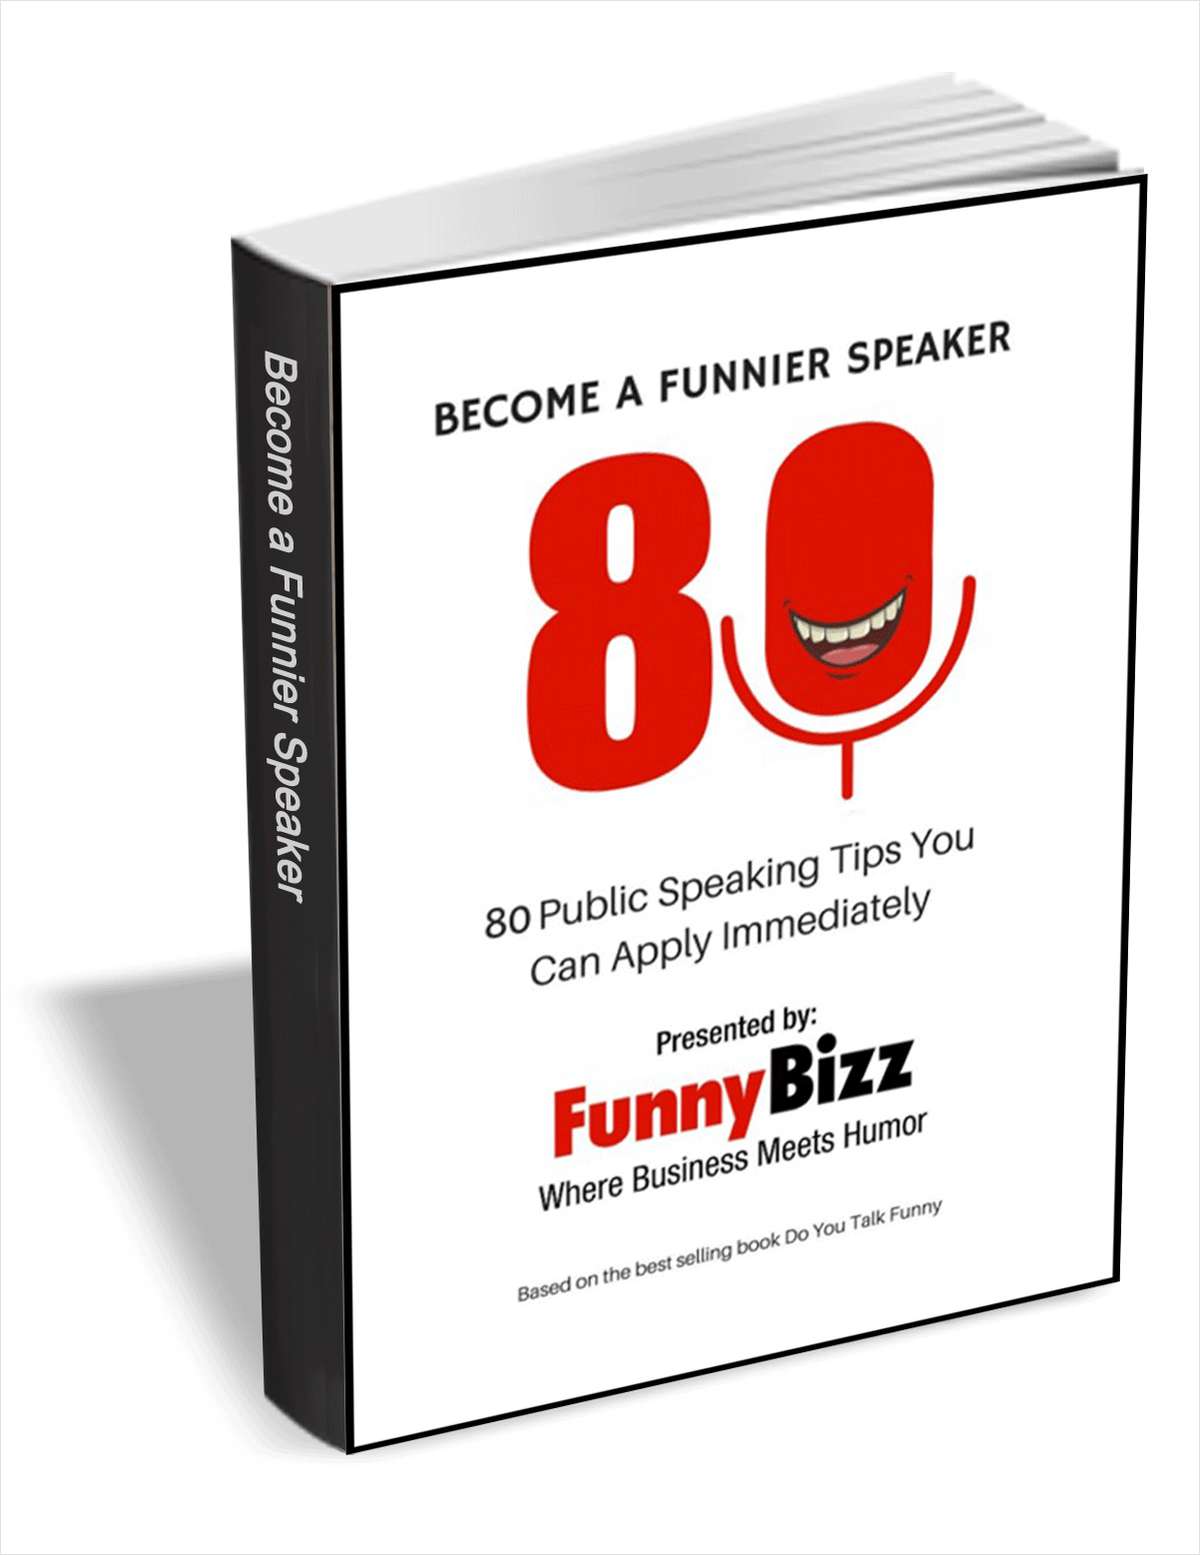 Become a Funnier Speaker - 80 Public Speaking Tips You Can Apply Immediately